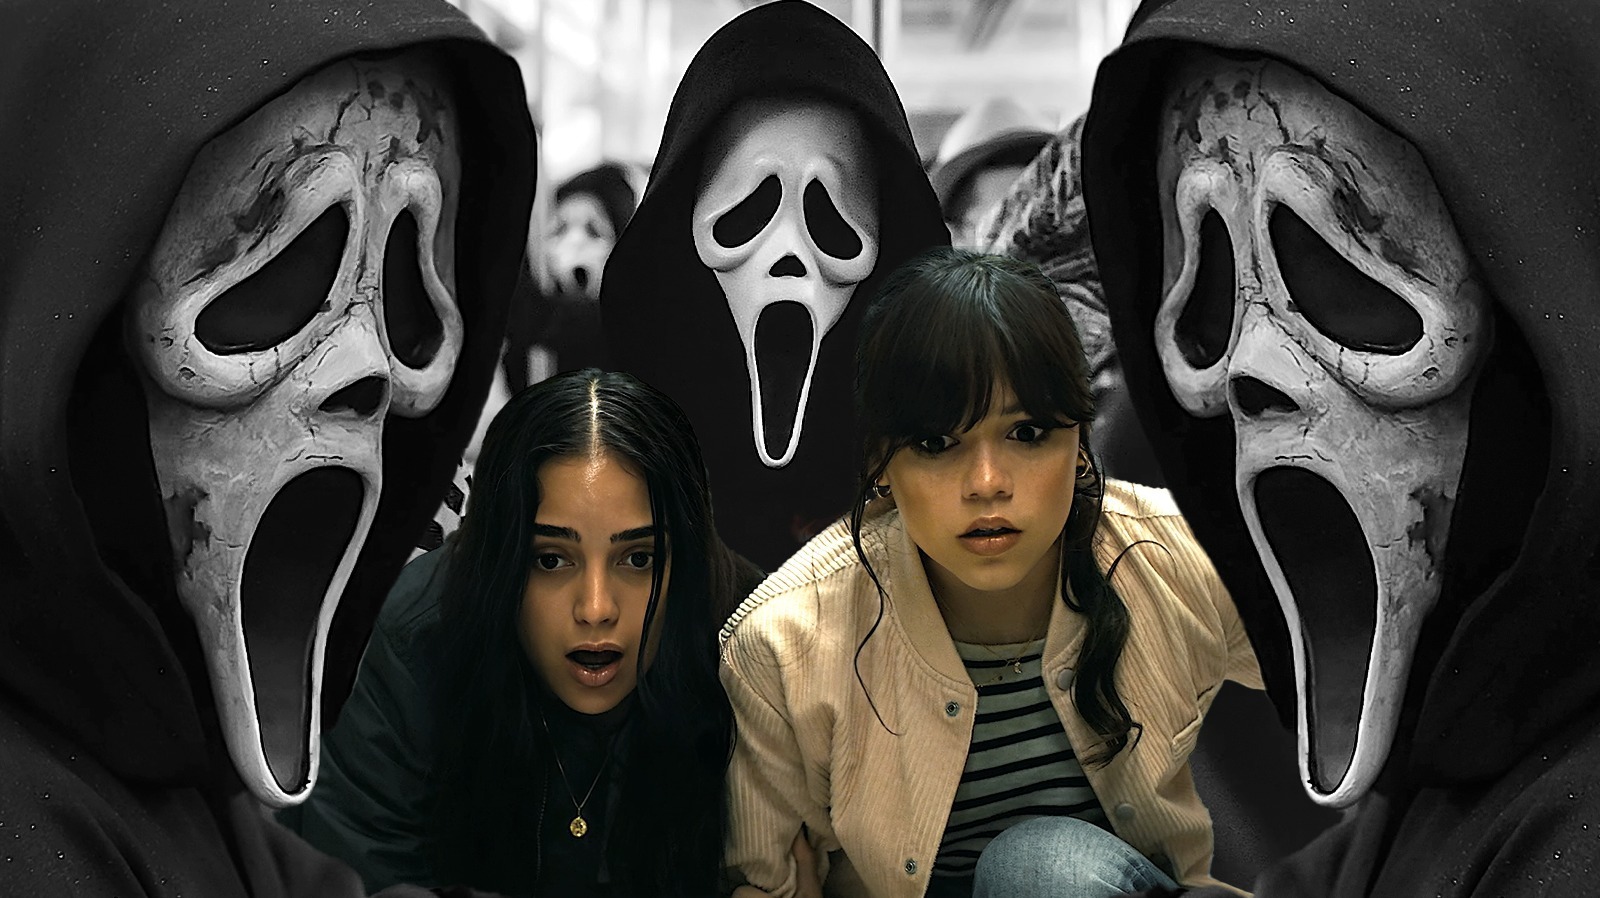 Scream 6' has been confirmed with filming set to begin this summer